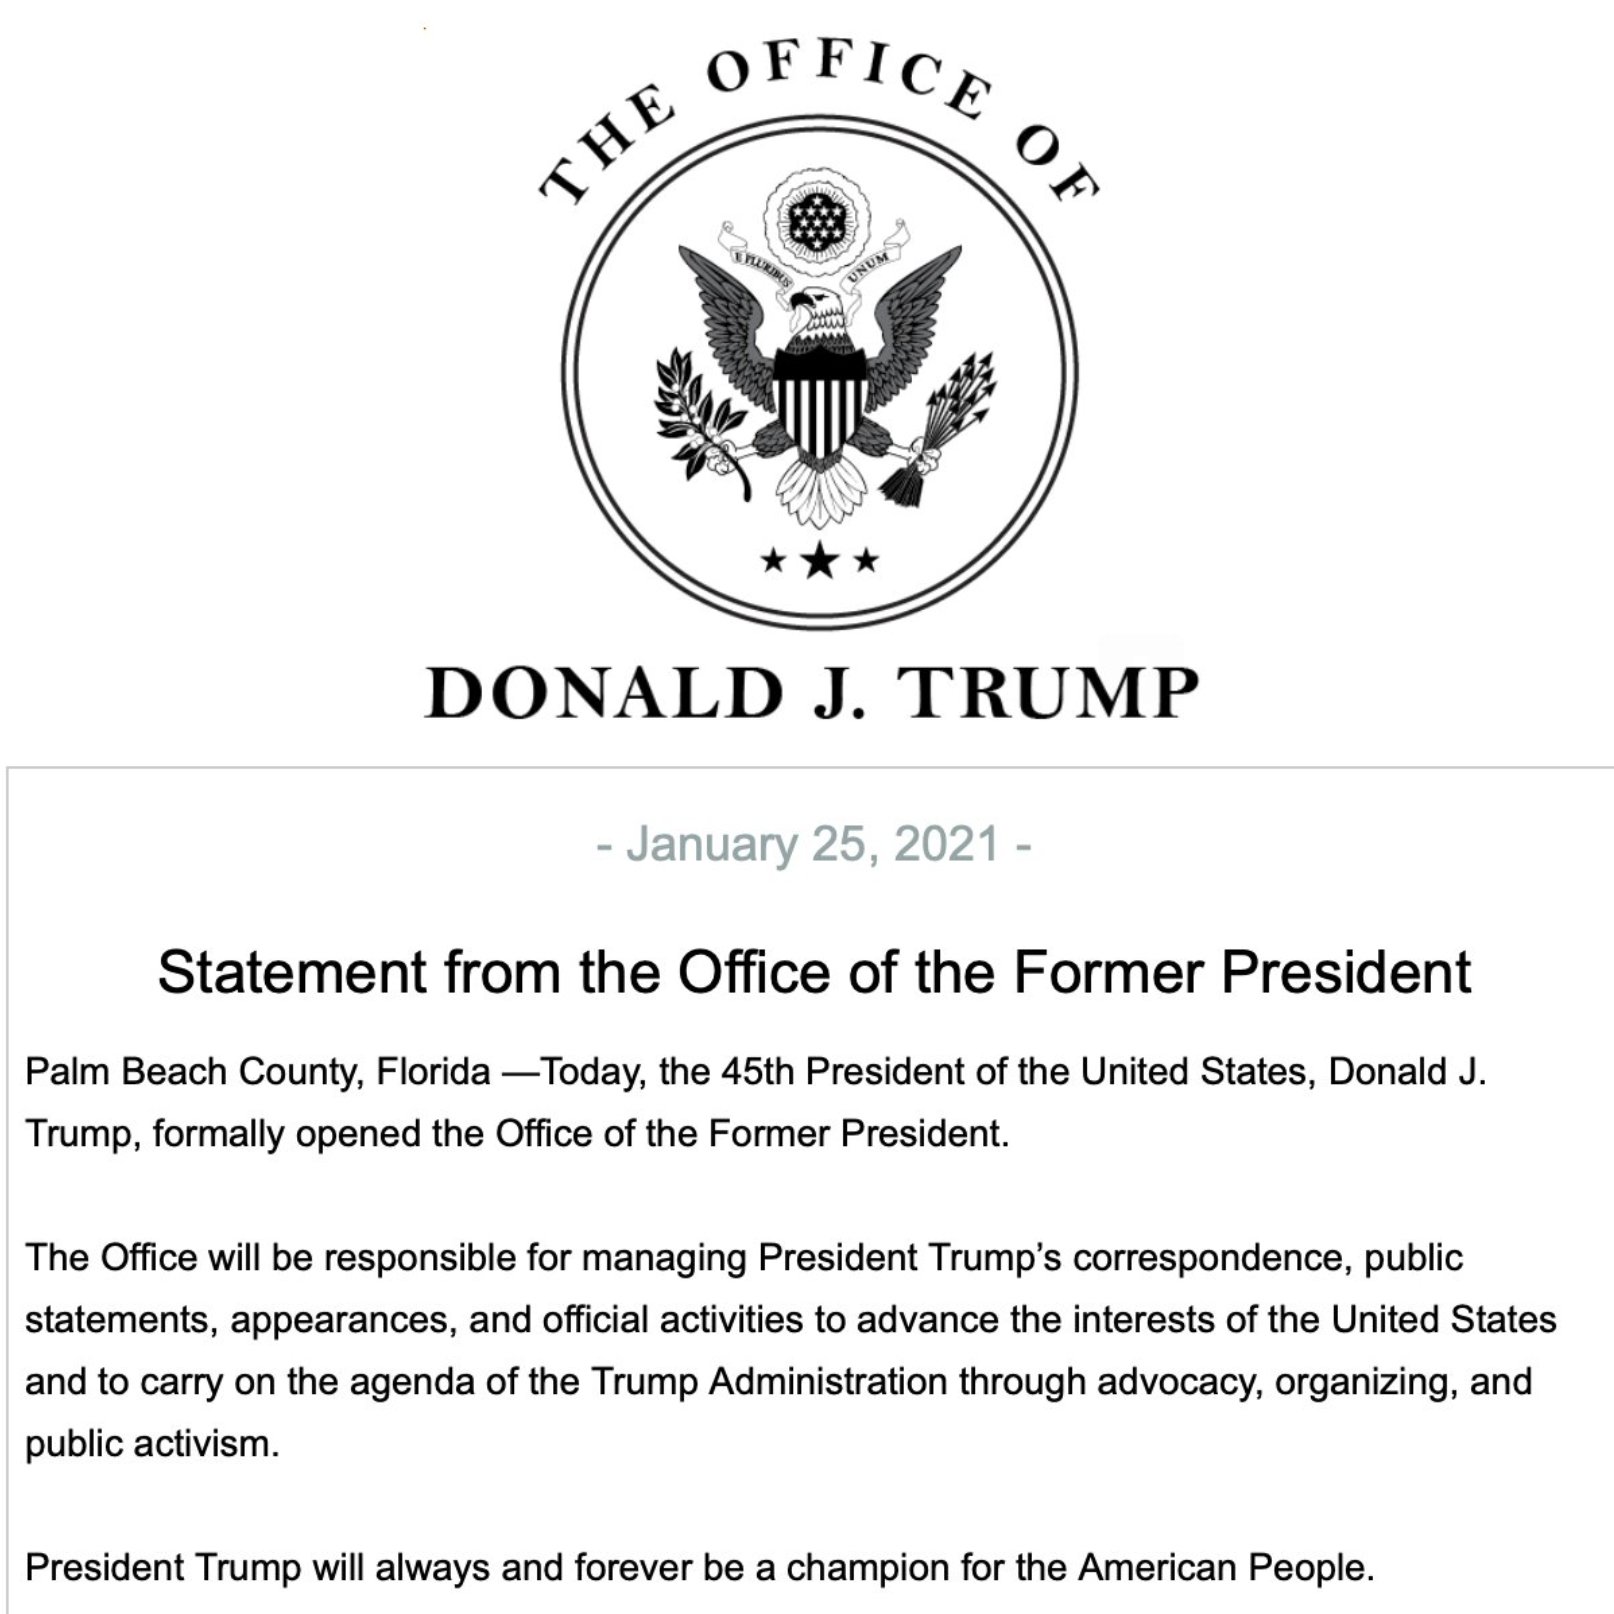 Aaron Parseghian On Twitter Former President Donald Trump Has Officially Opened The Office Of The Former President Which Will Manage His Correspondence Public Statements And Activities To Carry On The Agenda Of Office of the president letterhead